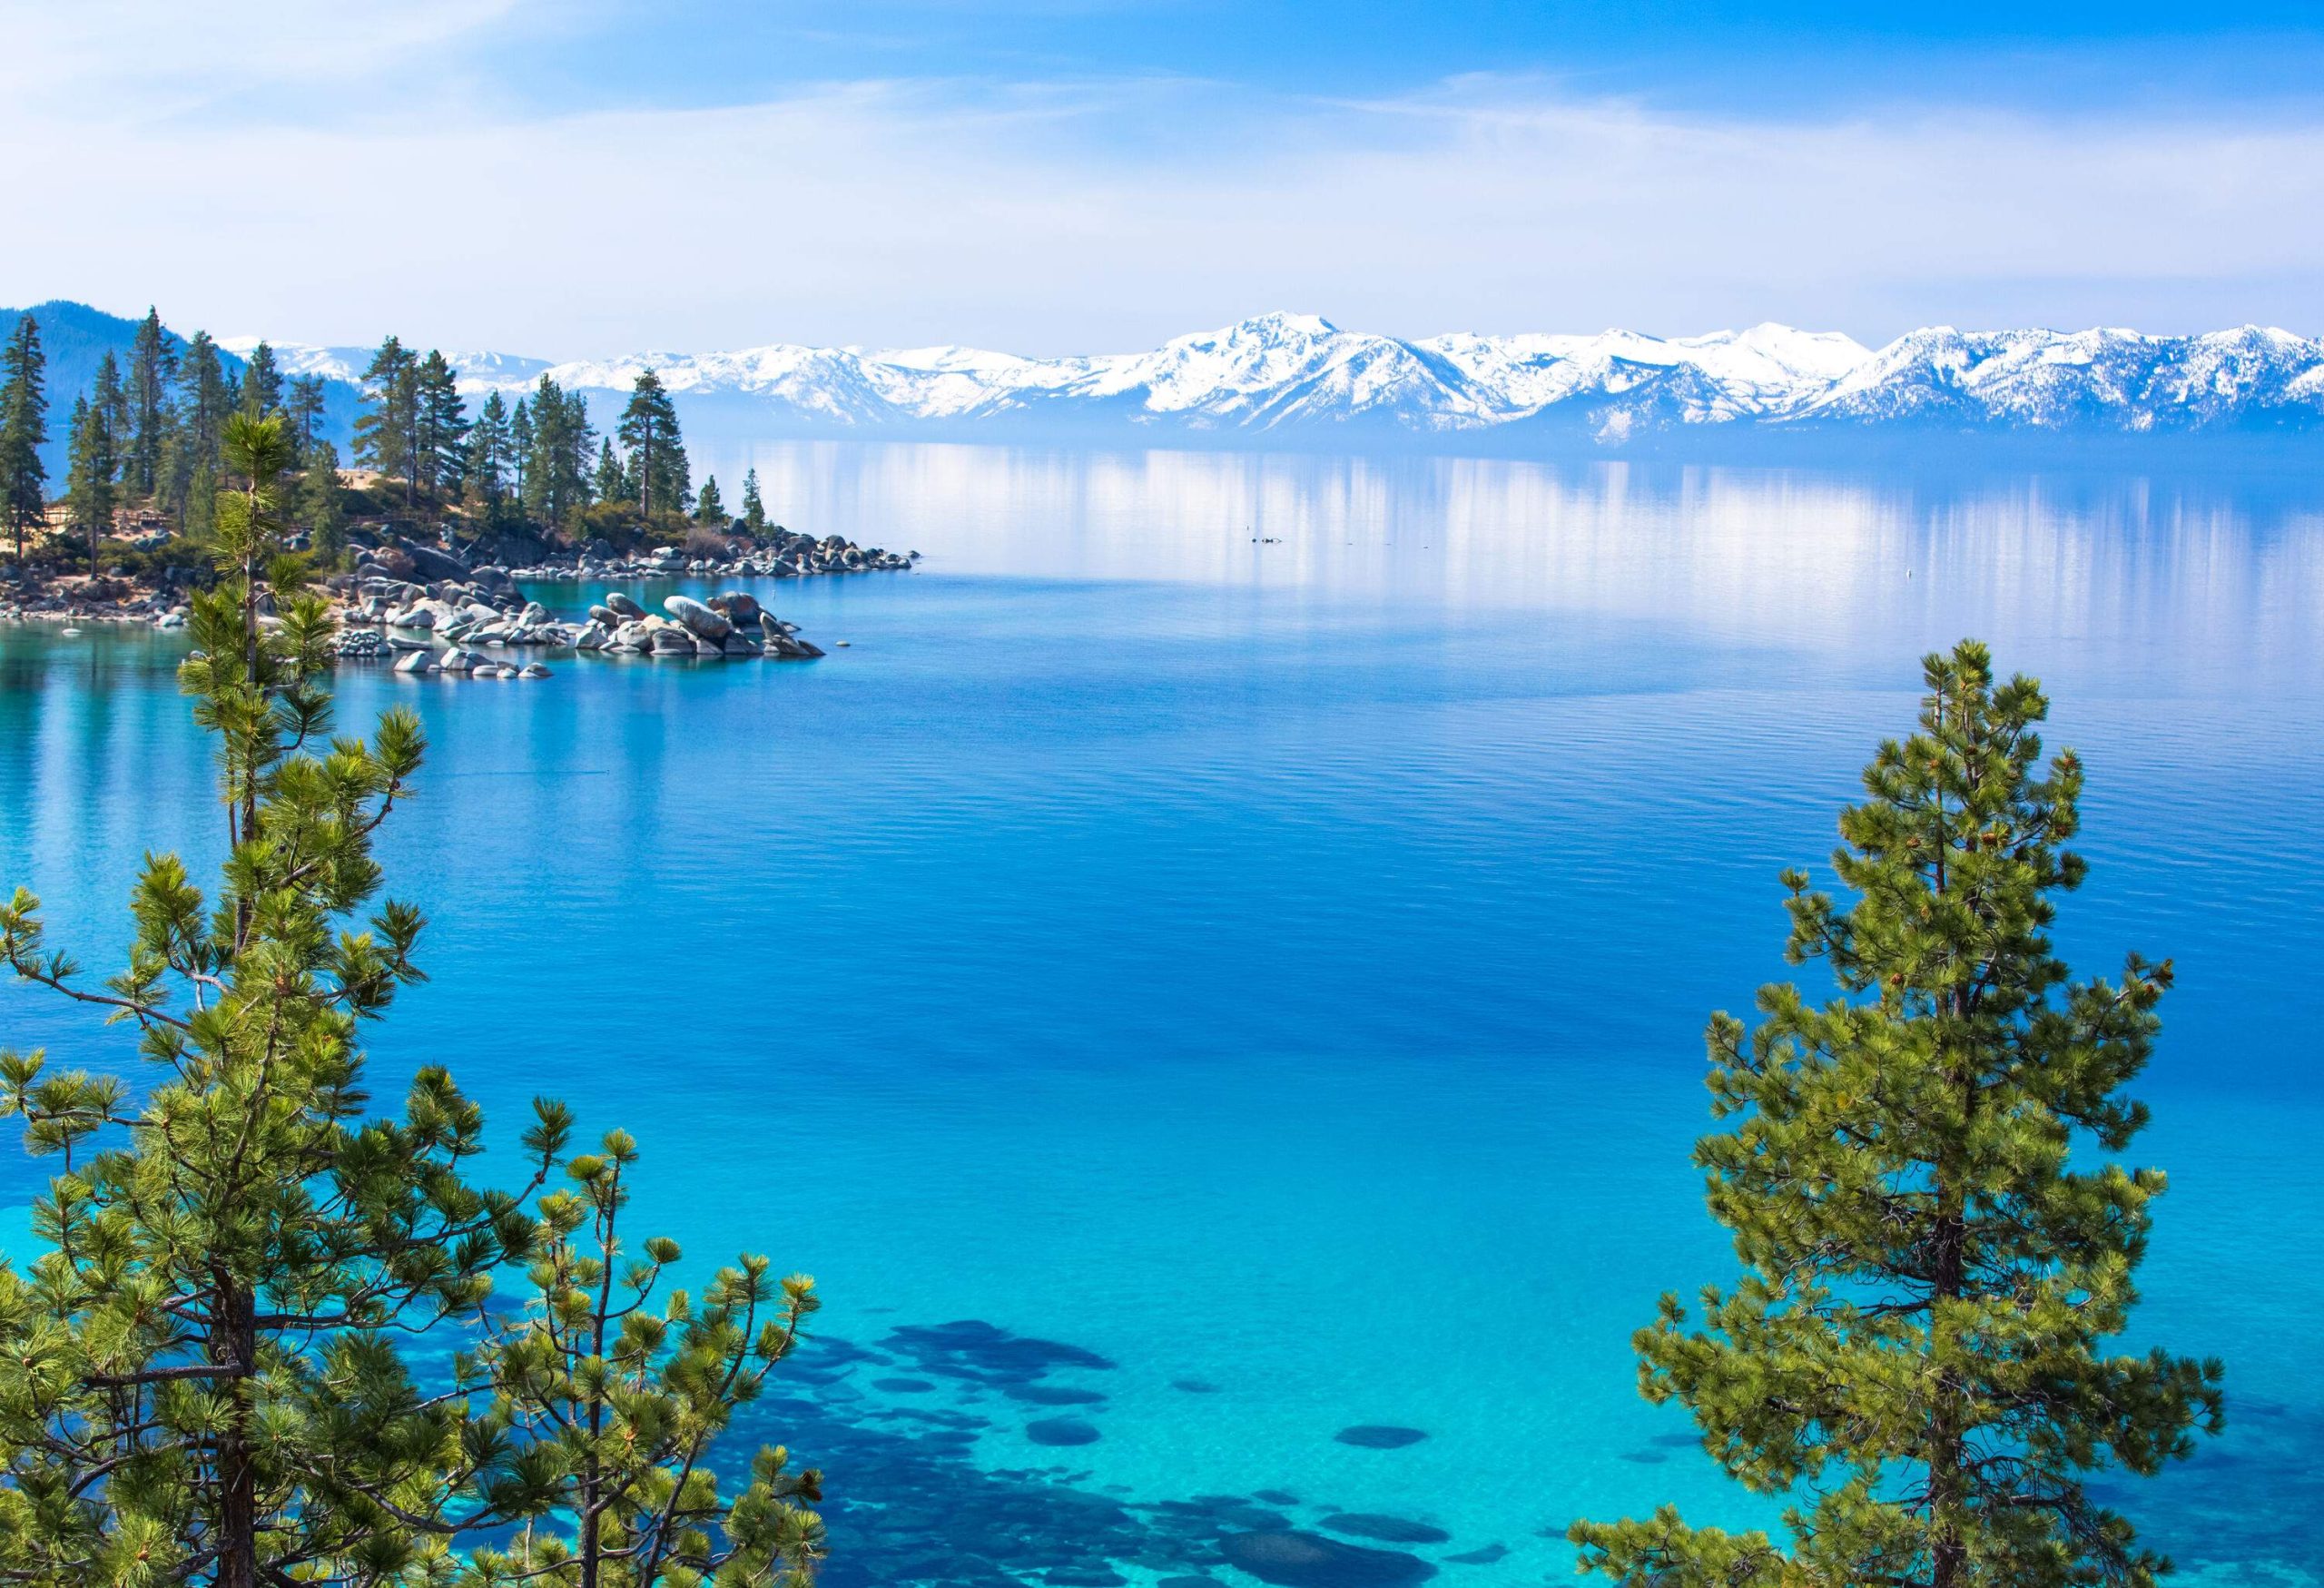 A turquoise-watered lake with a snow-covered mountain range in the background.